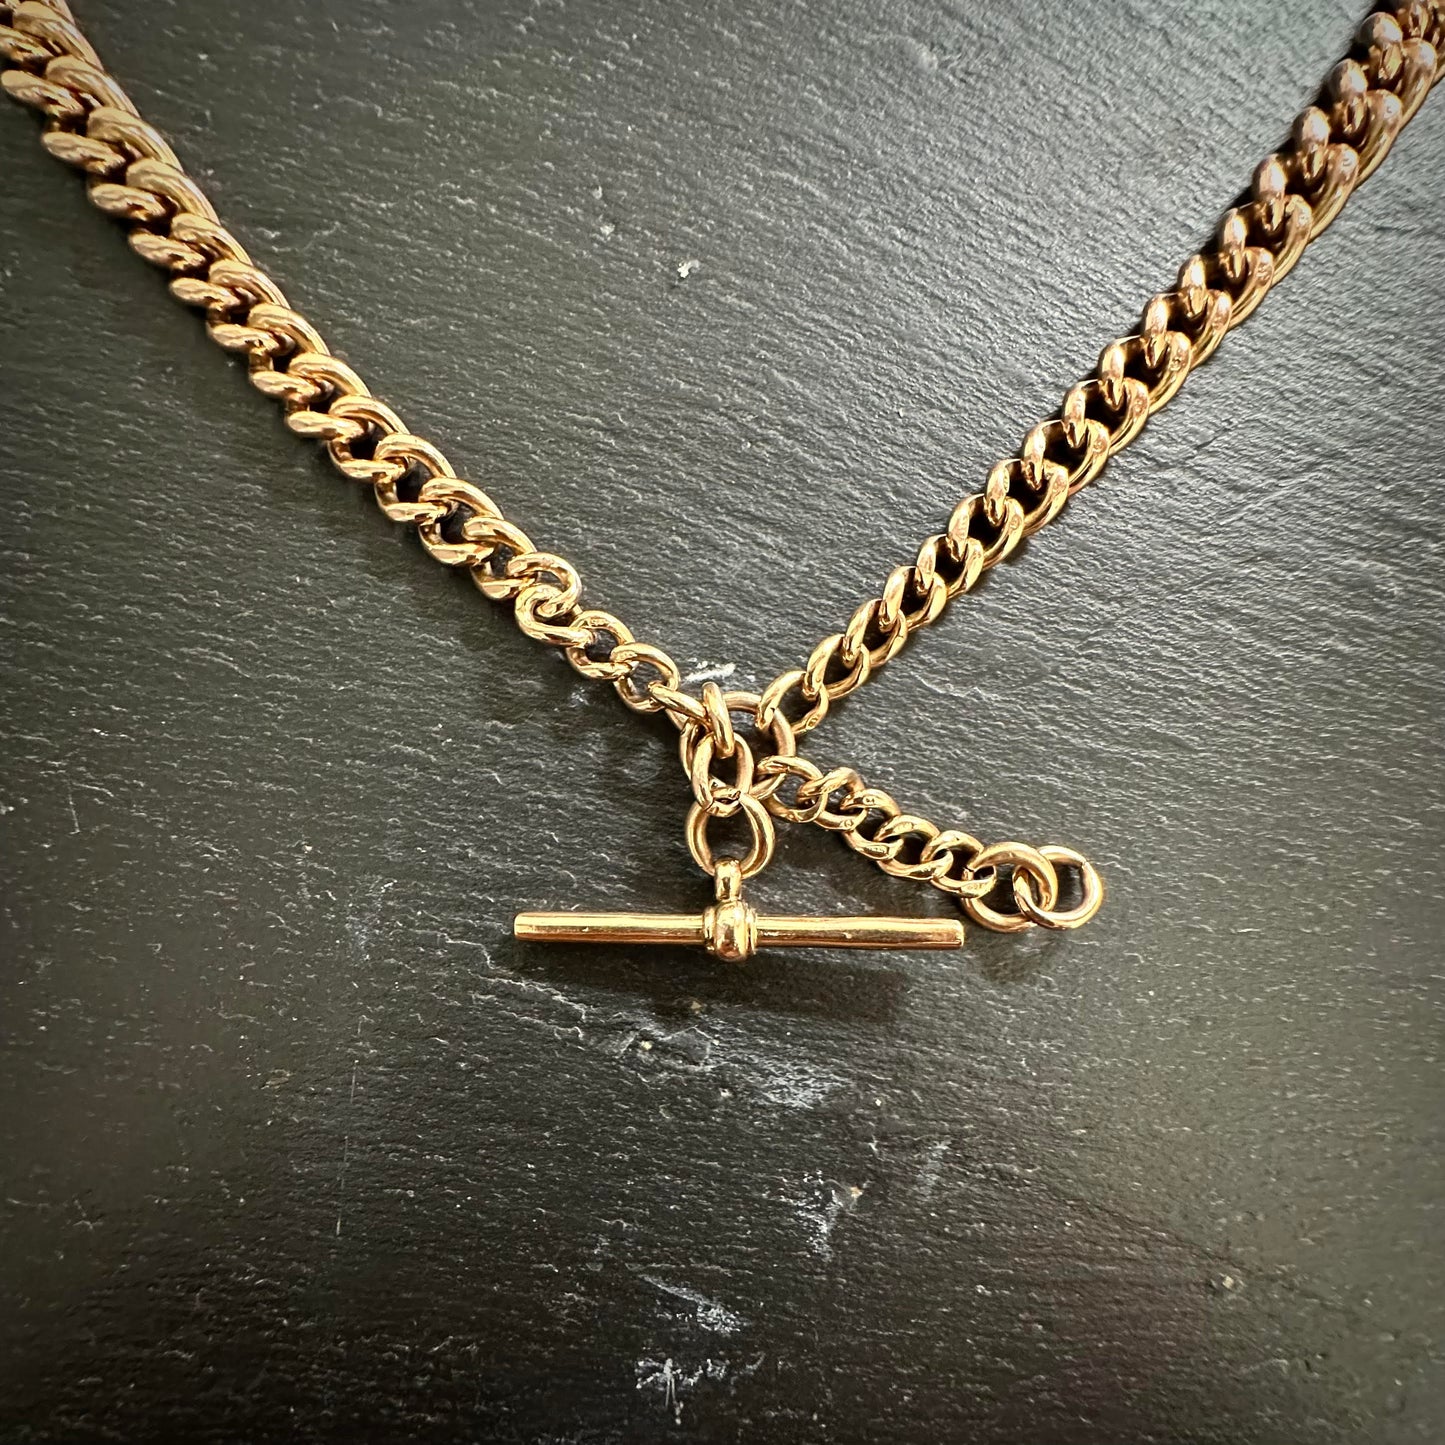 Pre-Owned: 9ct rose gold 16" 'Albert' chain - Polish finish